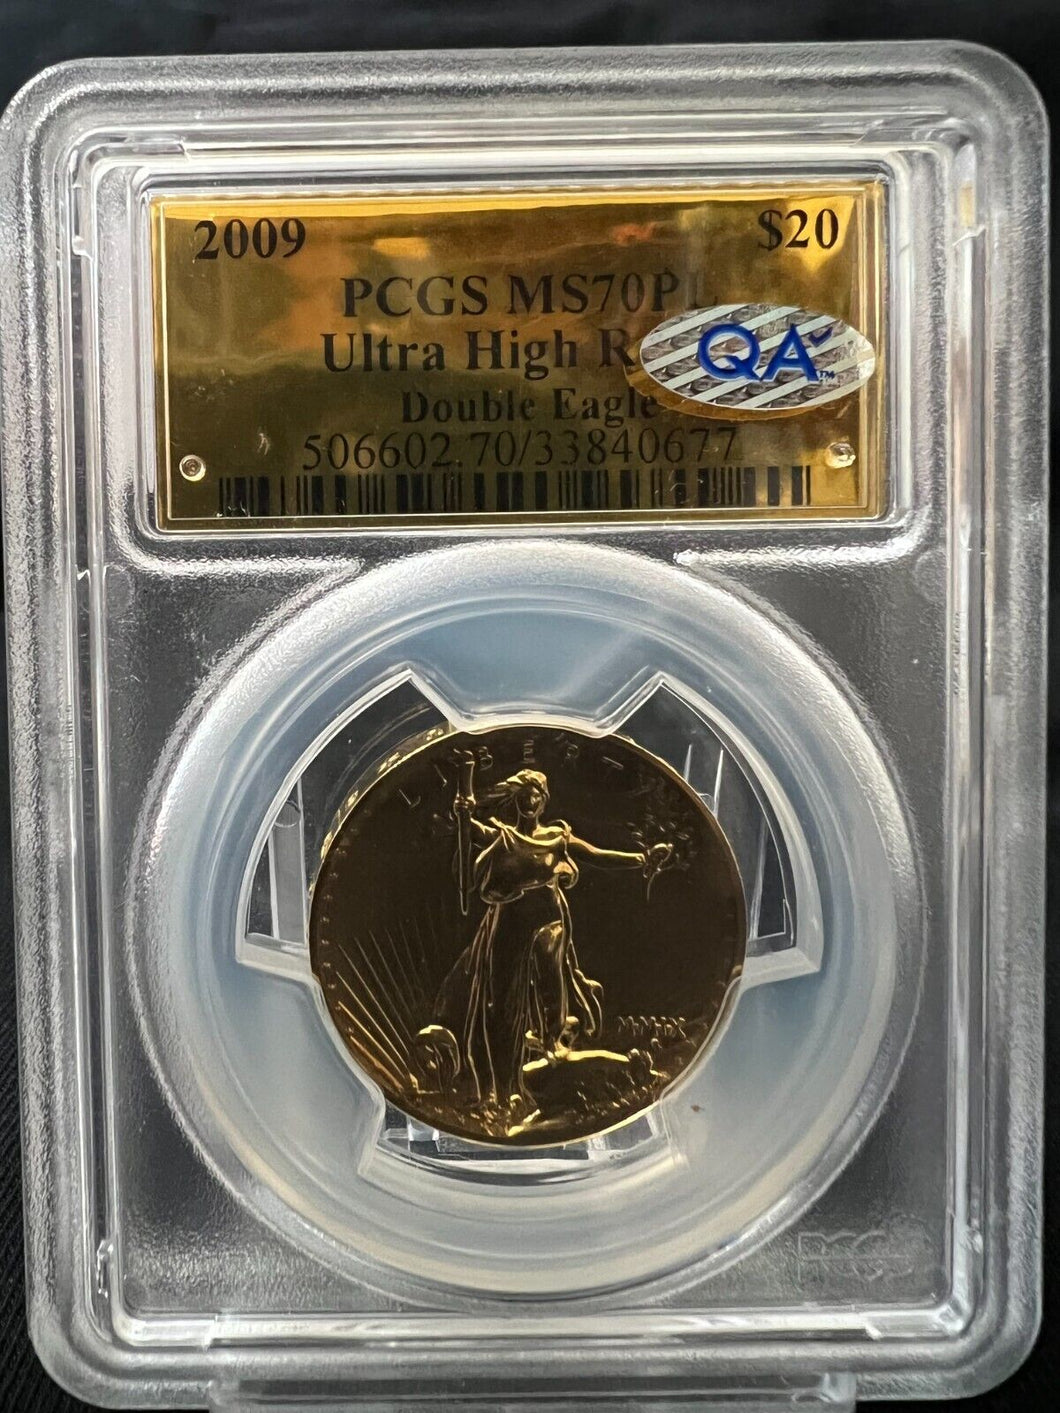 2009 St Gauden Double Eagle Ultra High Relief $20 Gold PCGS MS70 PL 'QA Assured'